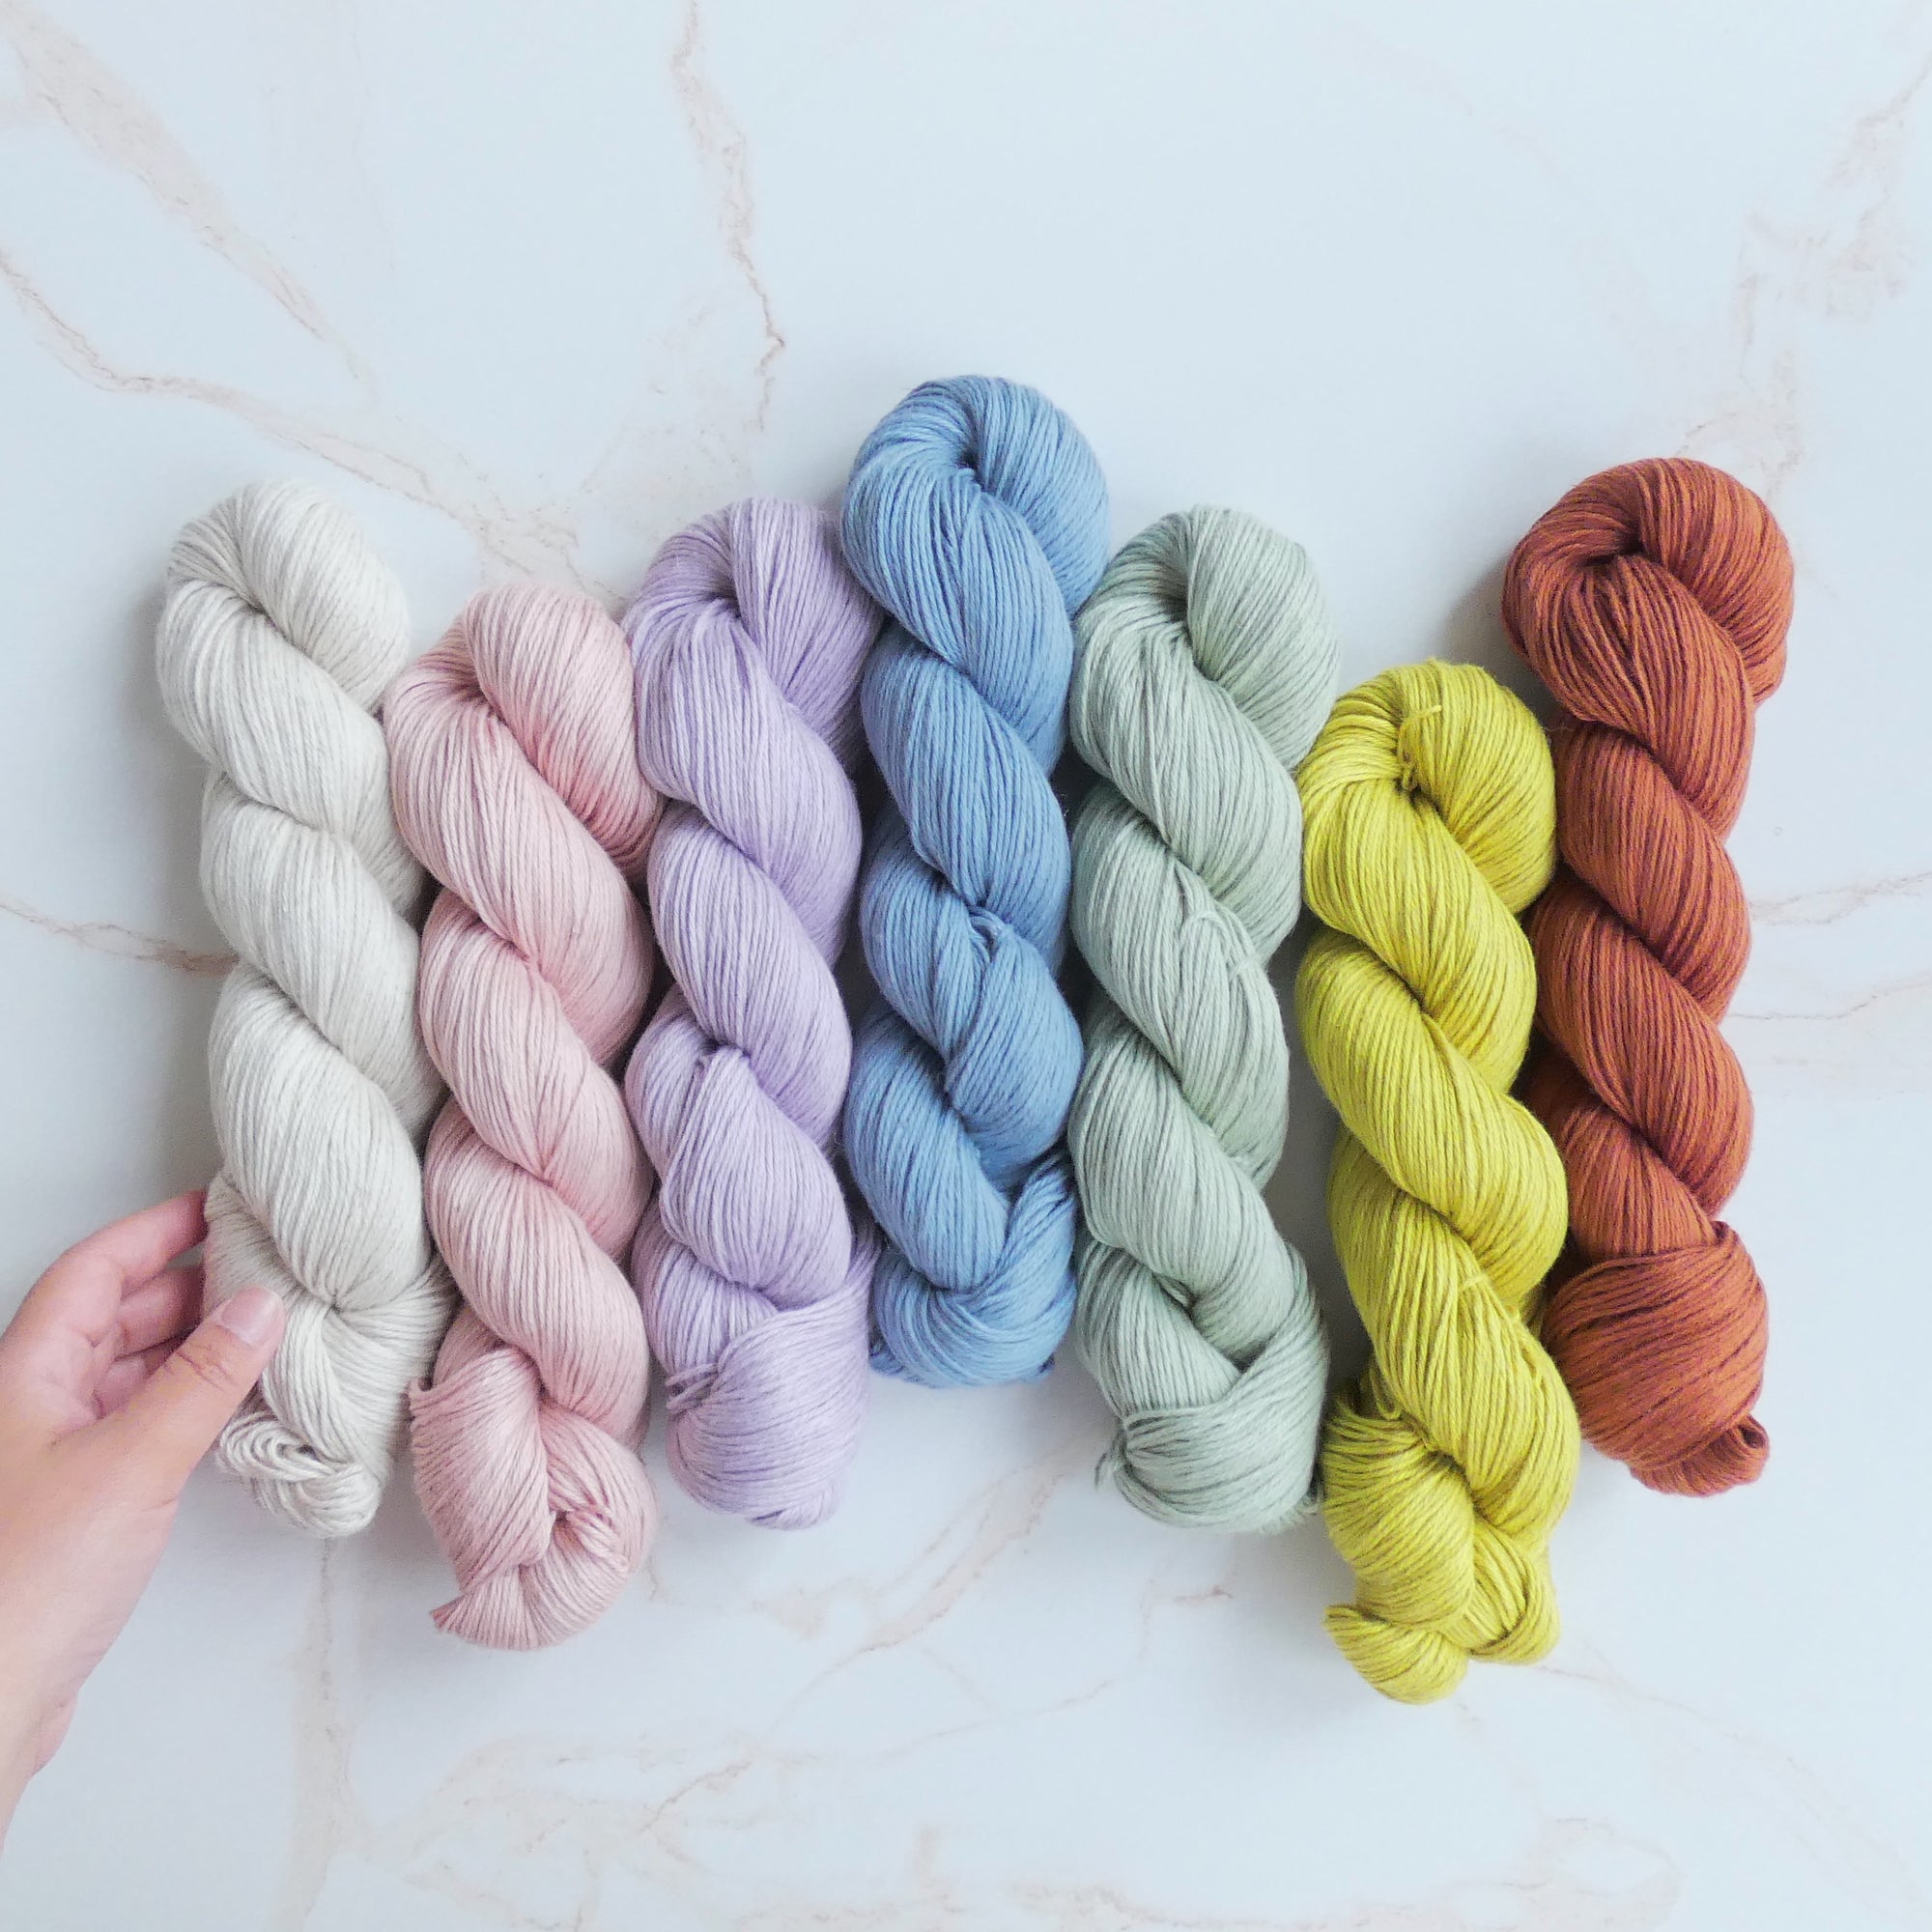 5 things to knit this summer with Cotton Lino